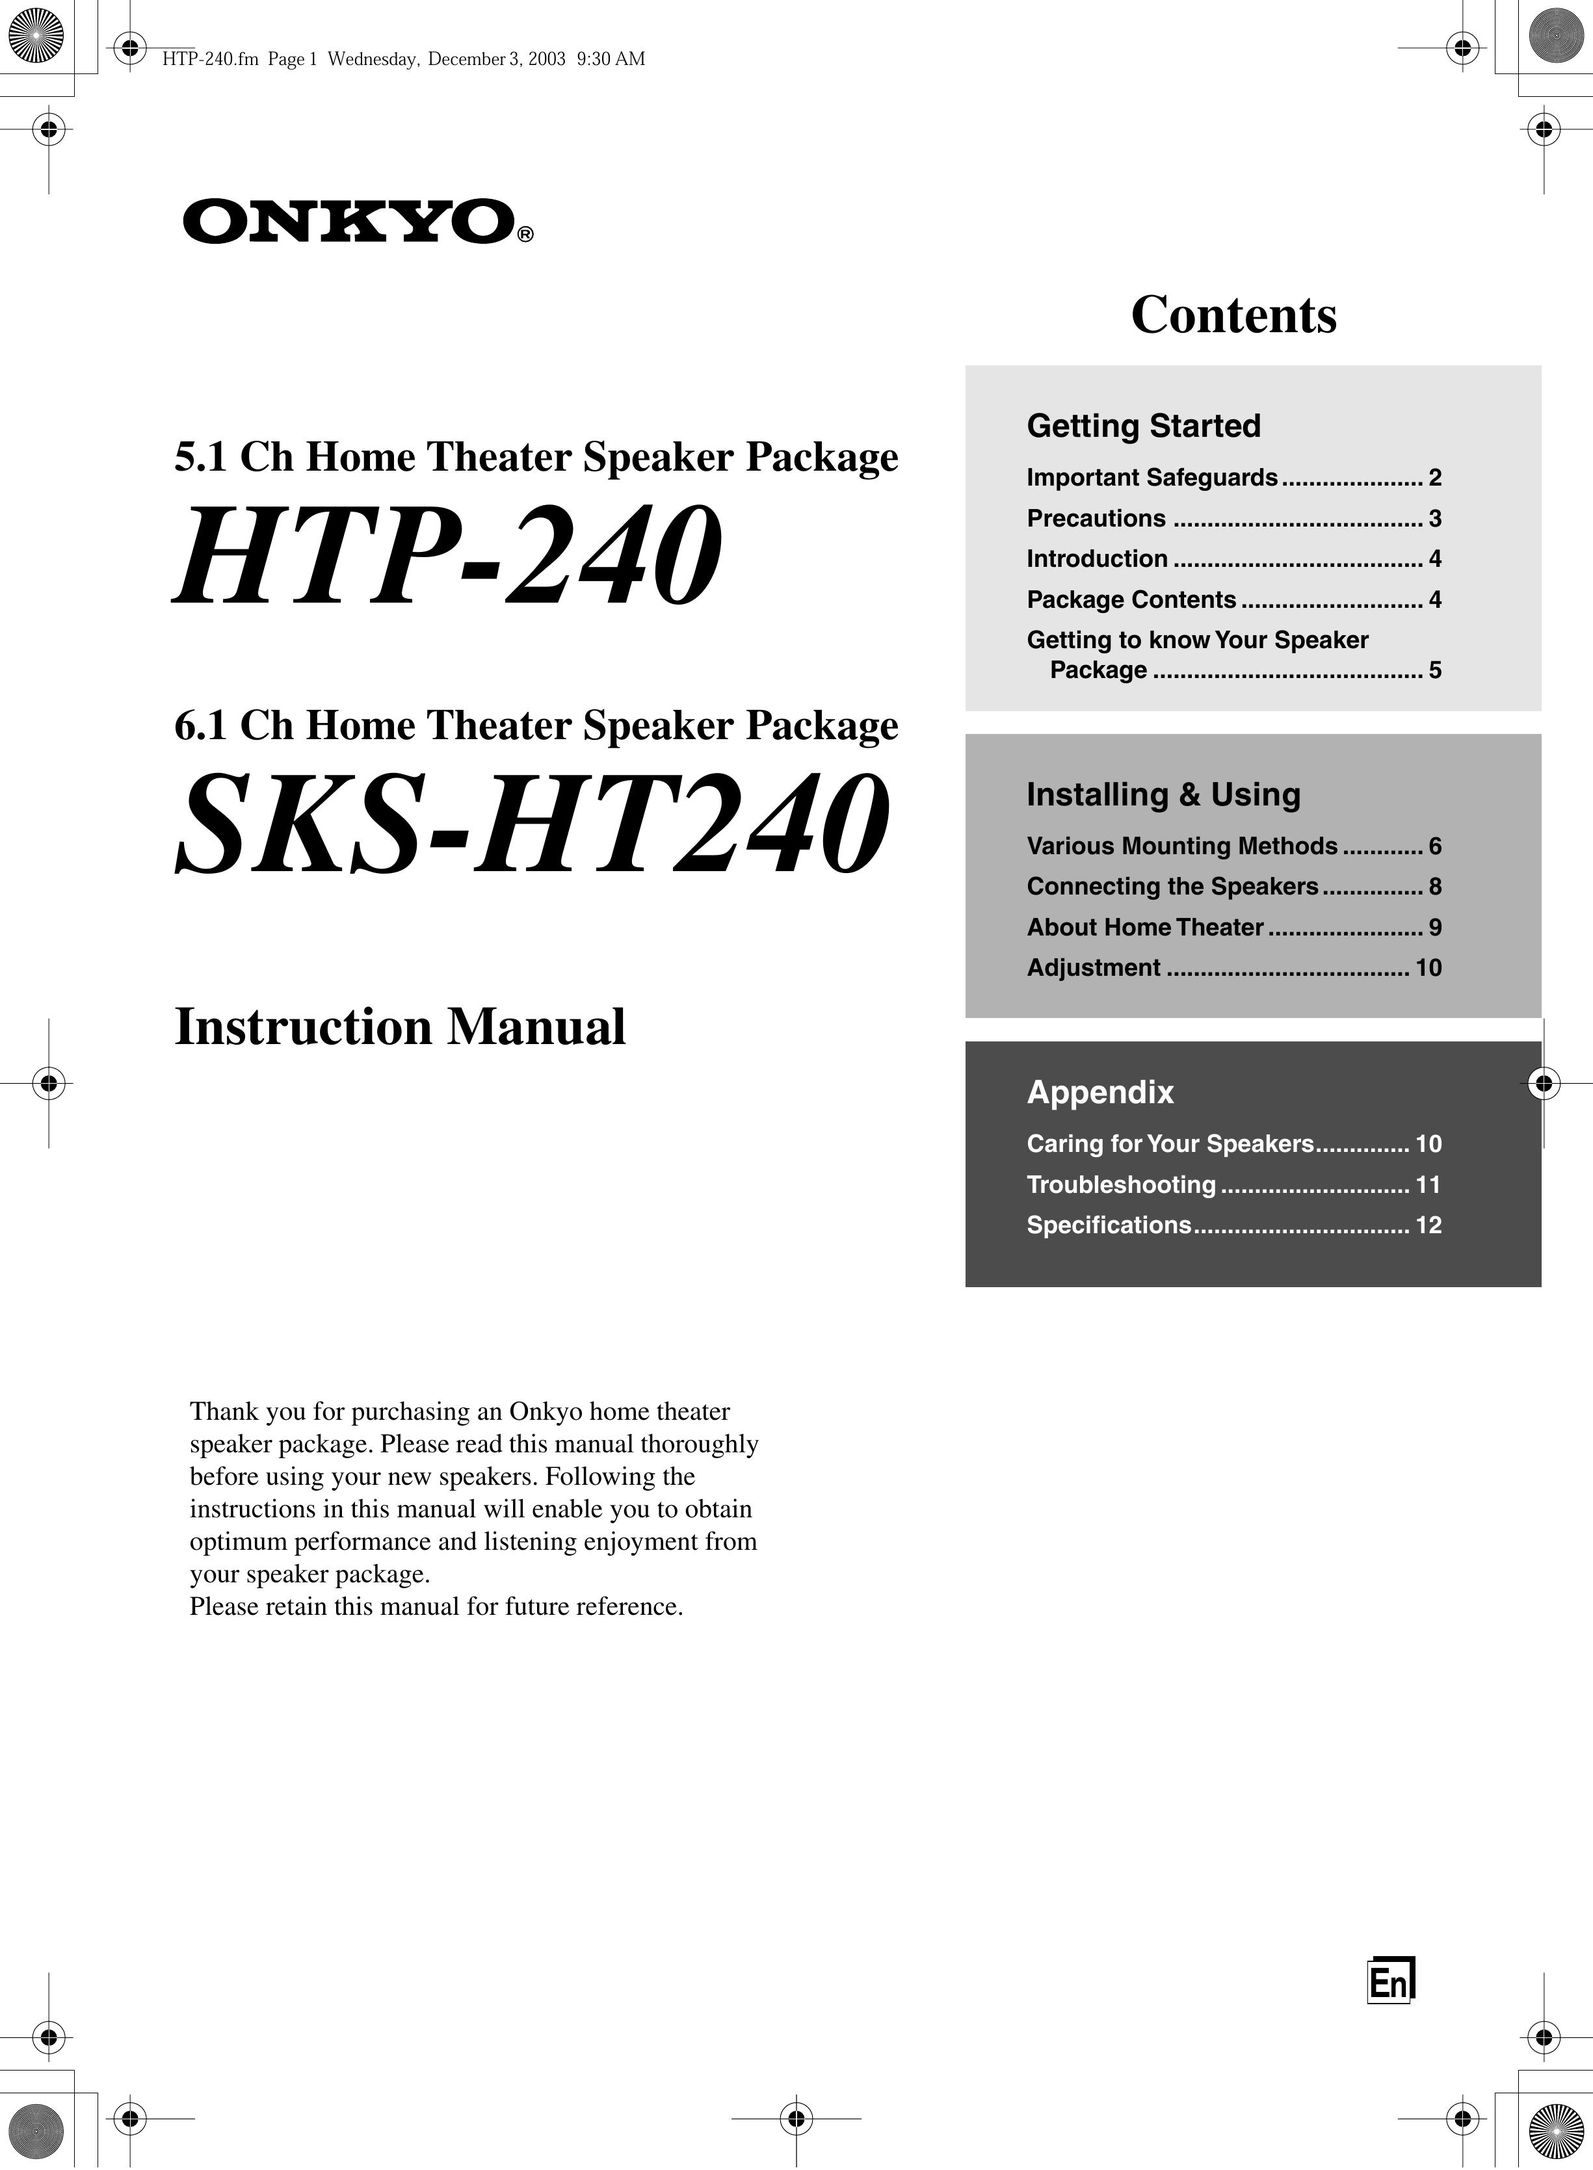 Onkyo HTP-240 Home Theater System User Manual